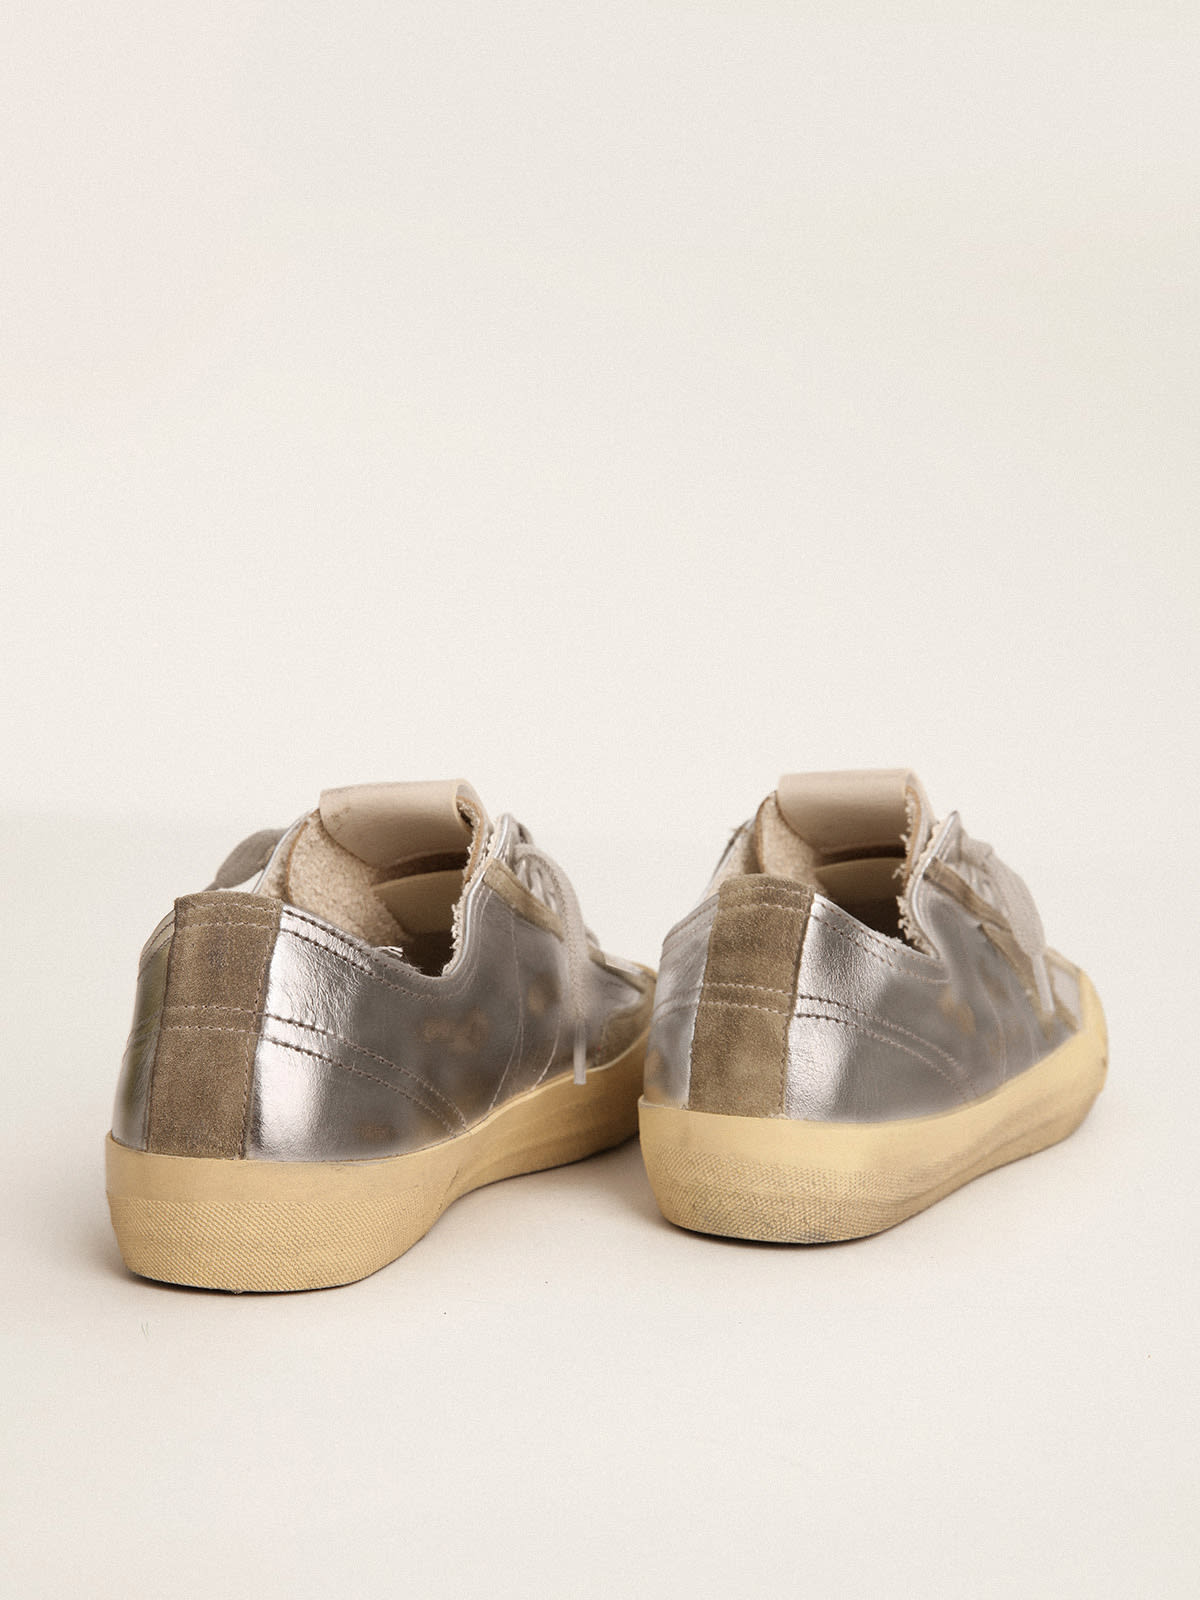 Golden Goose - V-Star LTD sneakers in silver metallic leather with star in ice-gray suede in 